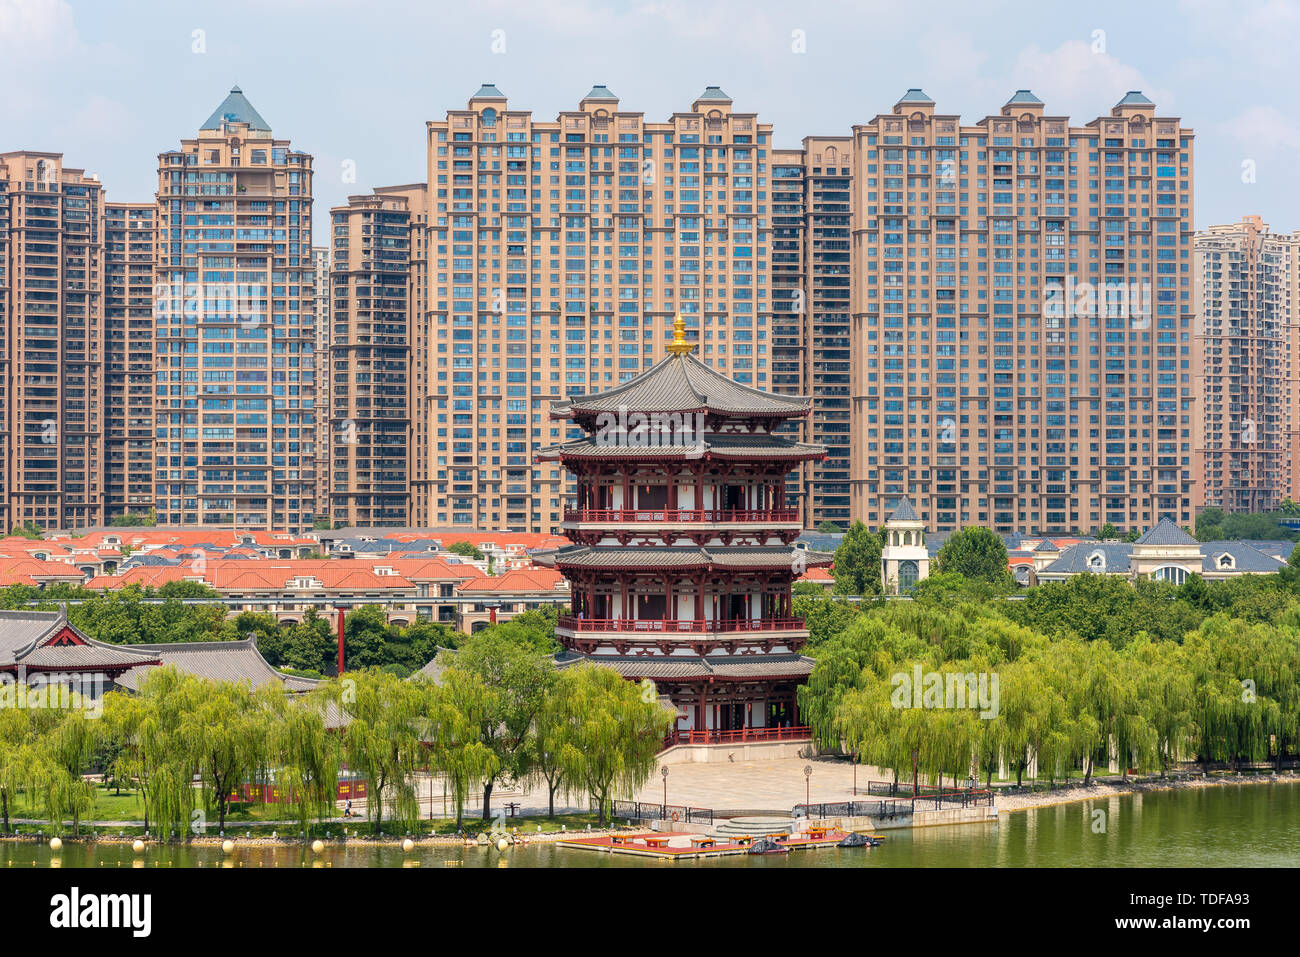 Xi'an,Shaanxi province,China - Aug 12,2018: Pagoda against buildings aerial view in Tang paradise park Stock Photo